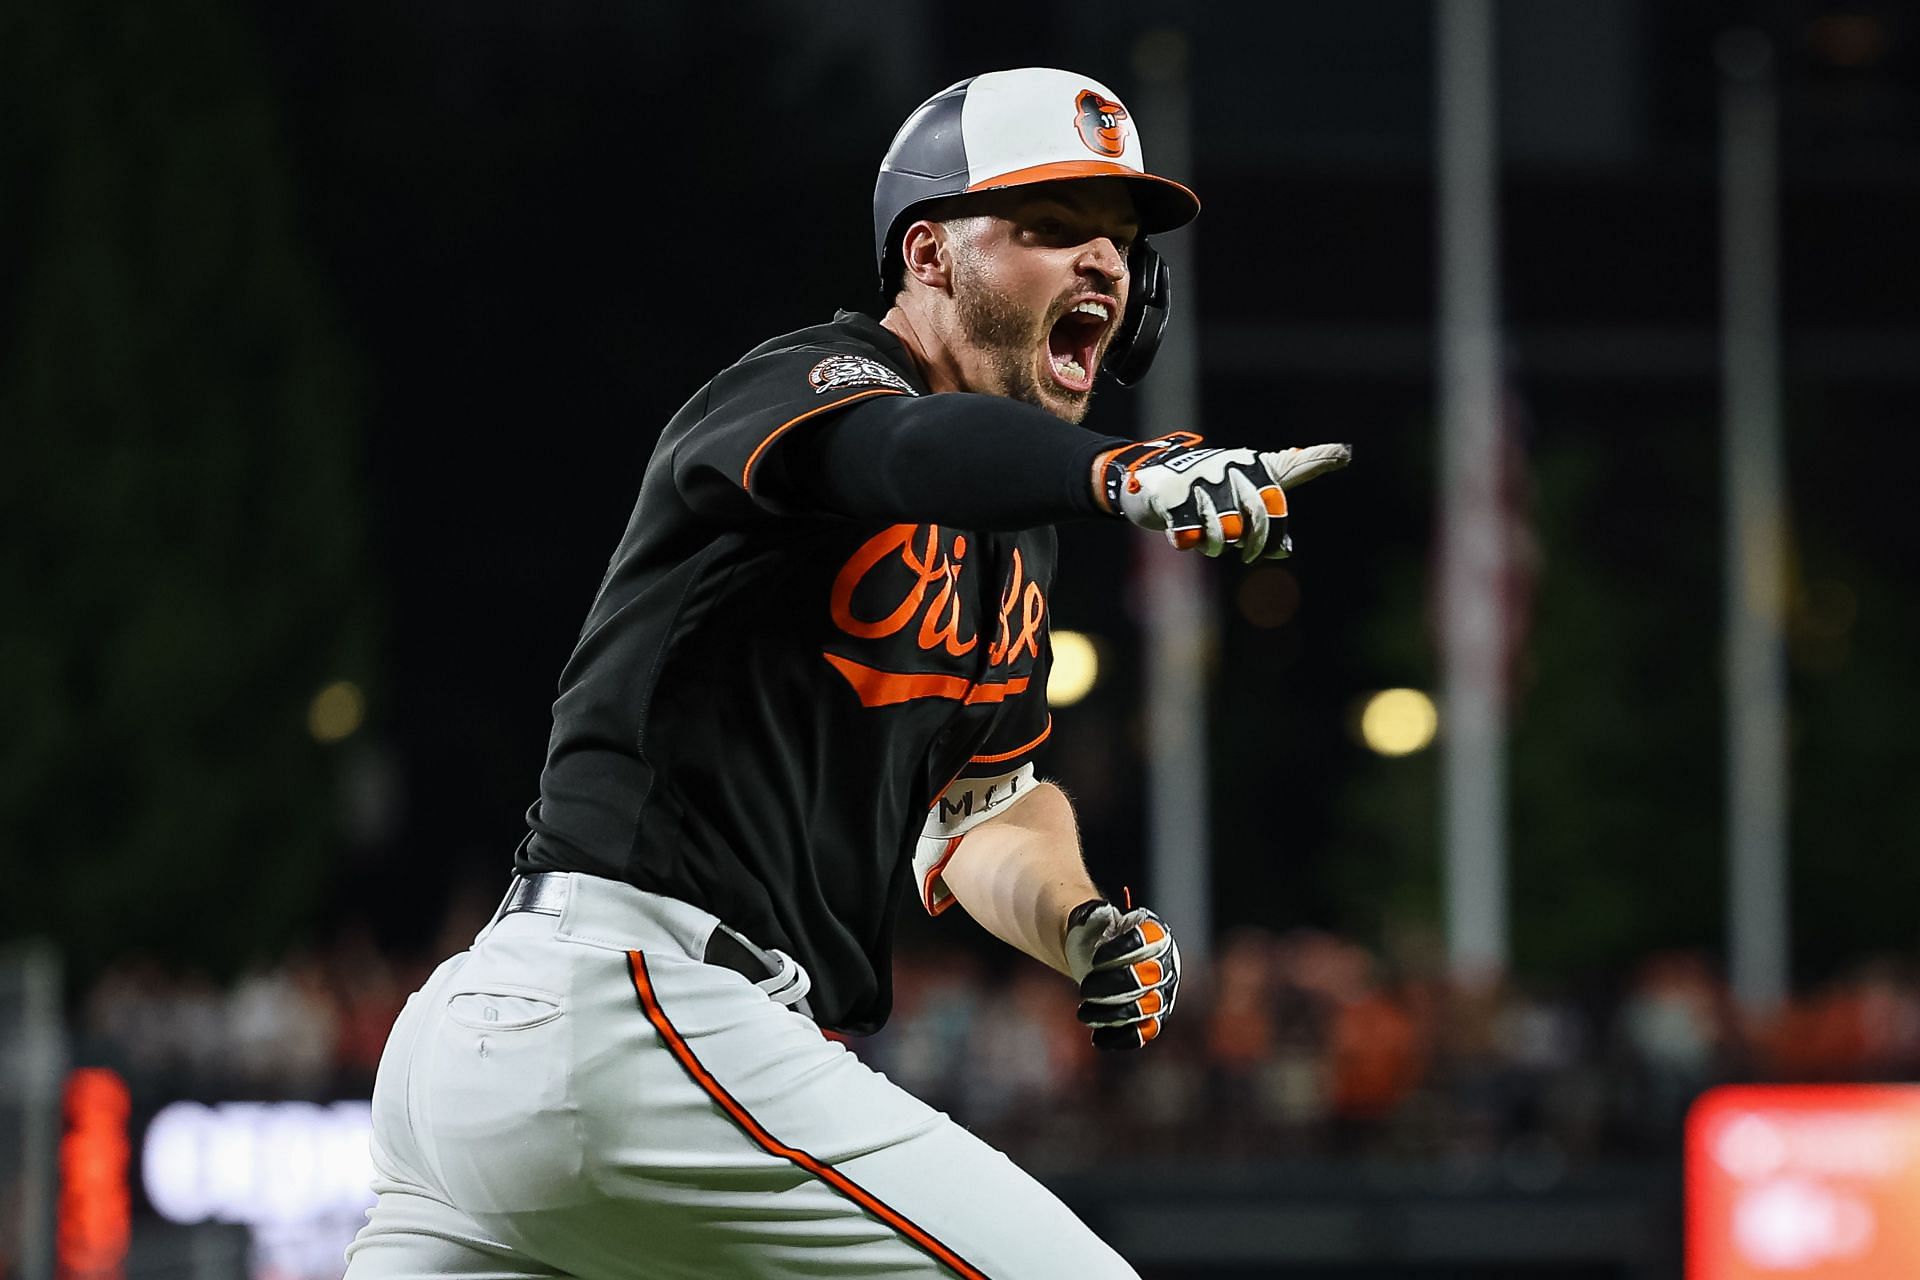 Trey Mancini reacts to potential final home Orioles game amid Mets trade  talks